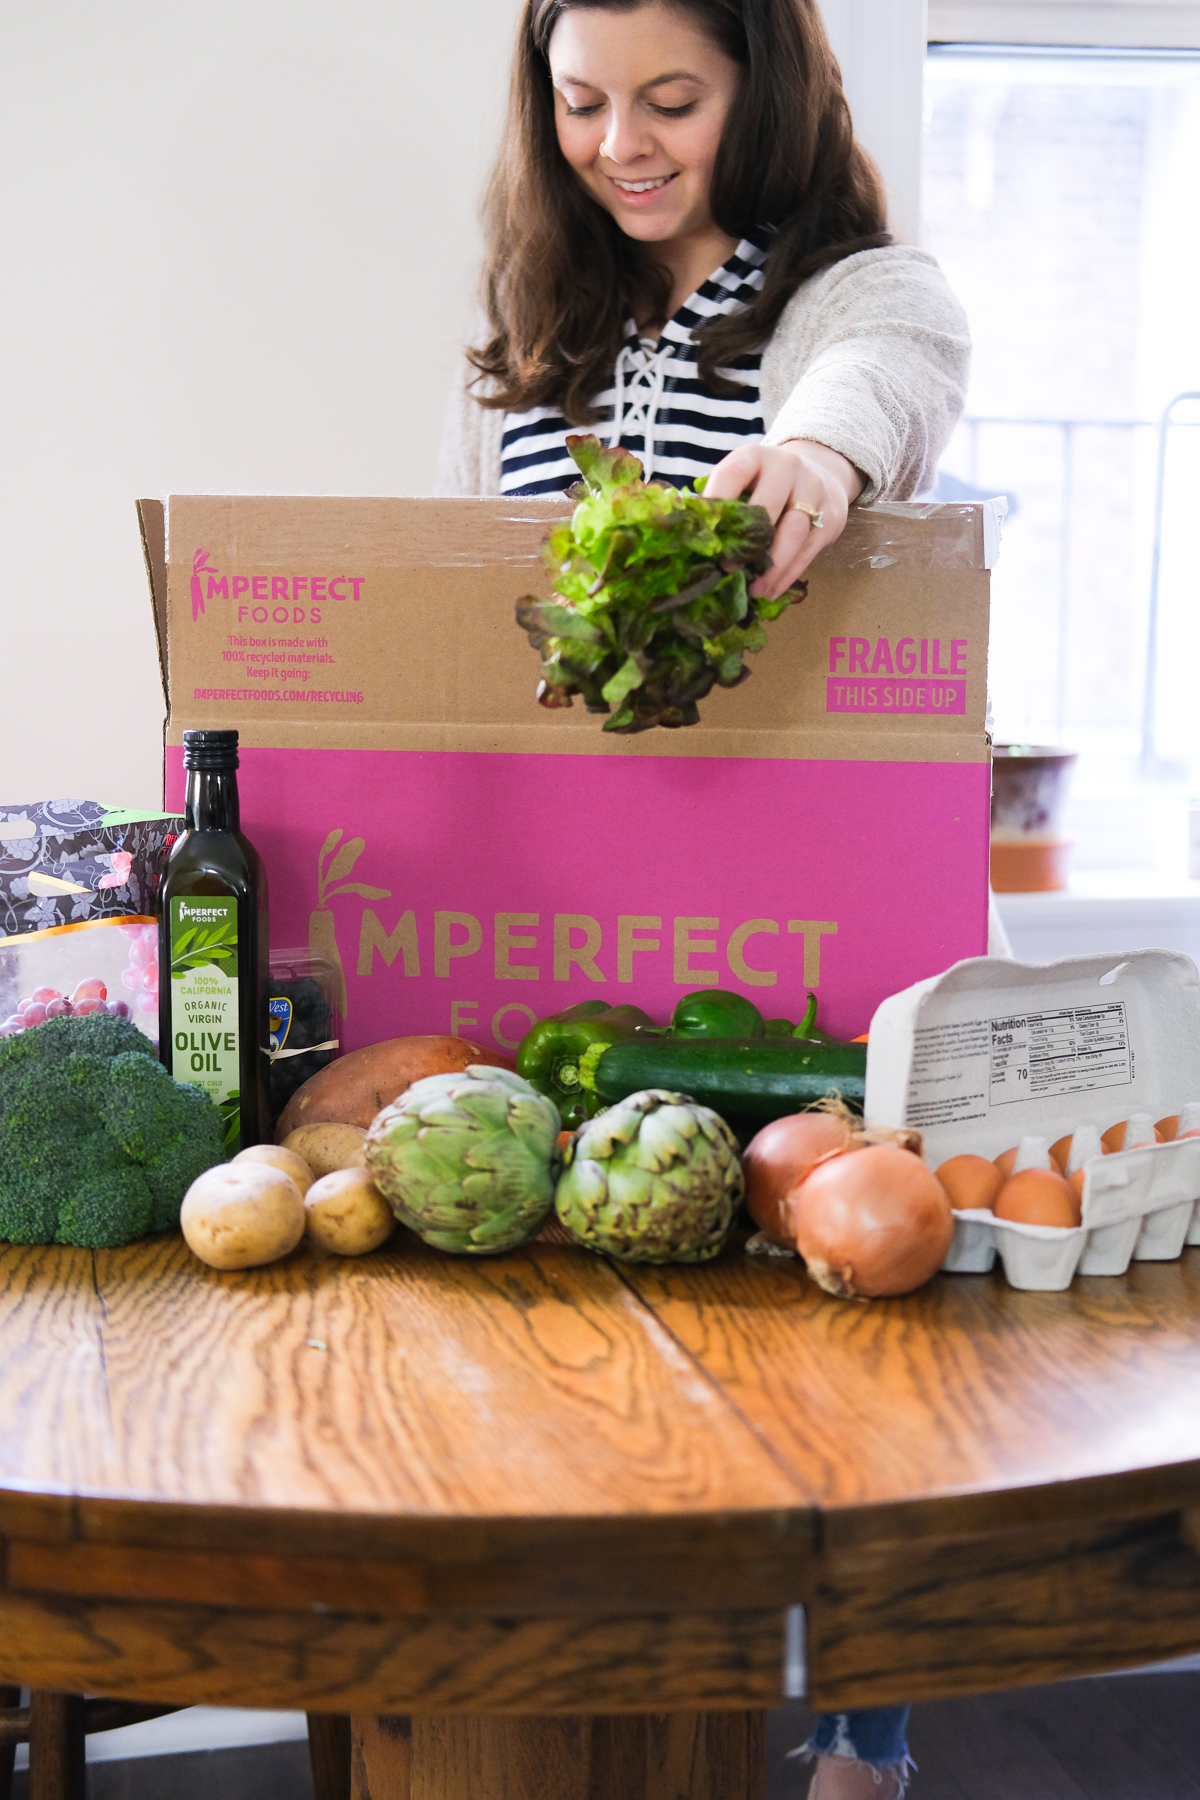 Why I Like to Order From Imperfect Foods